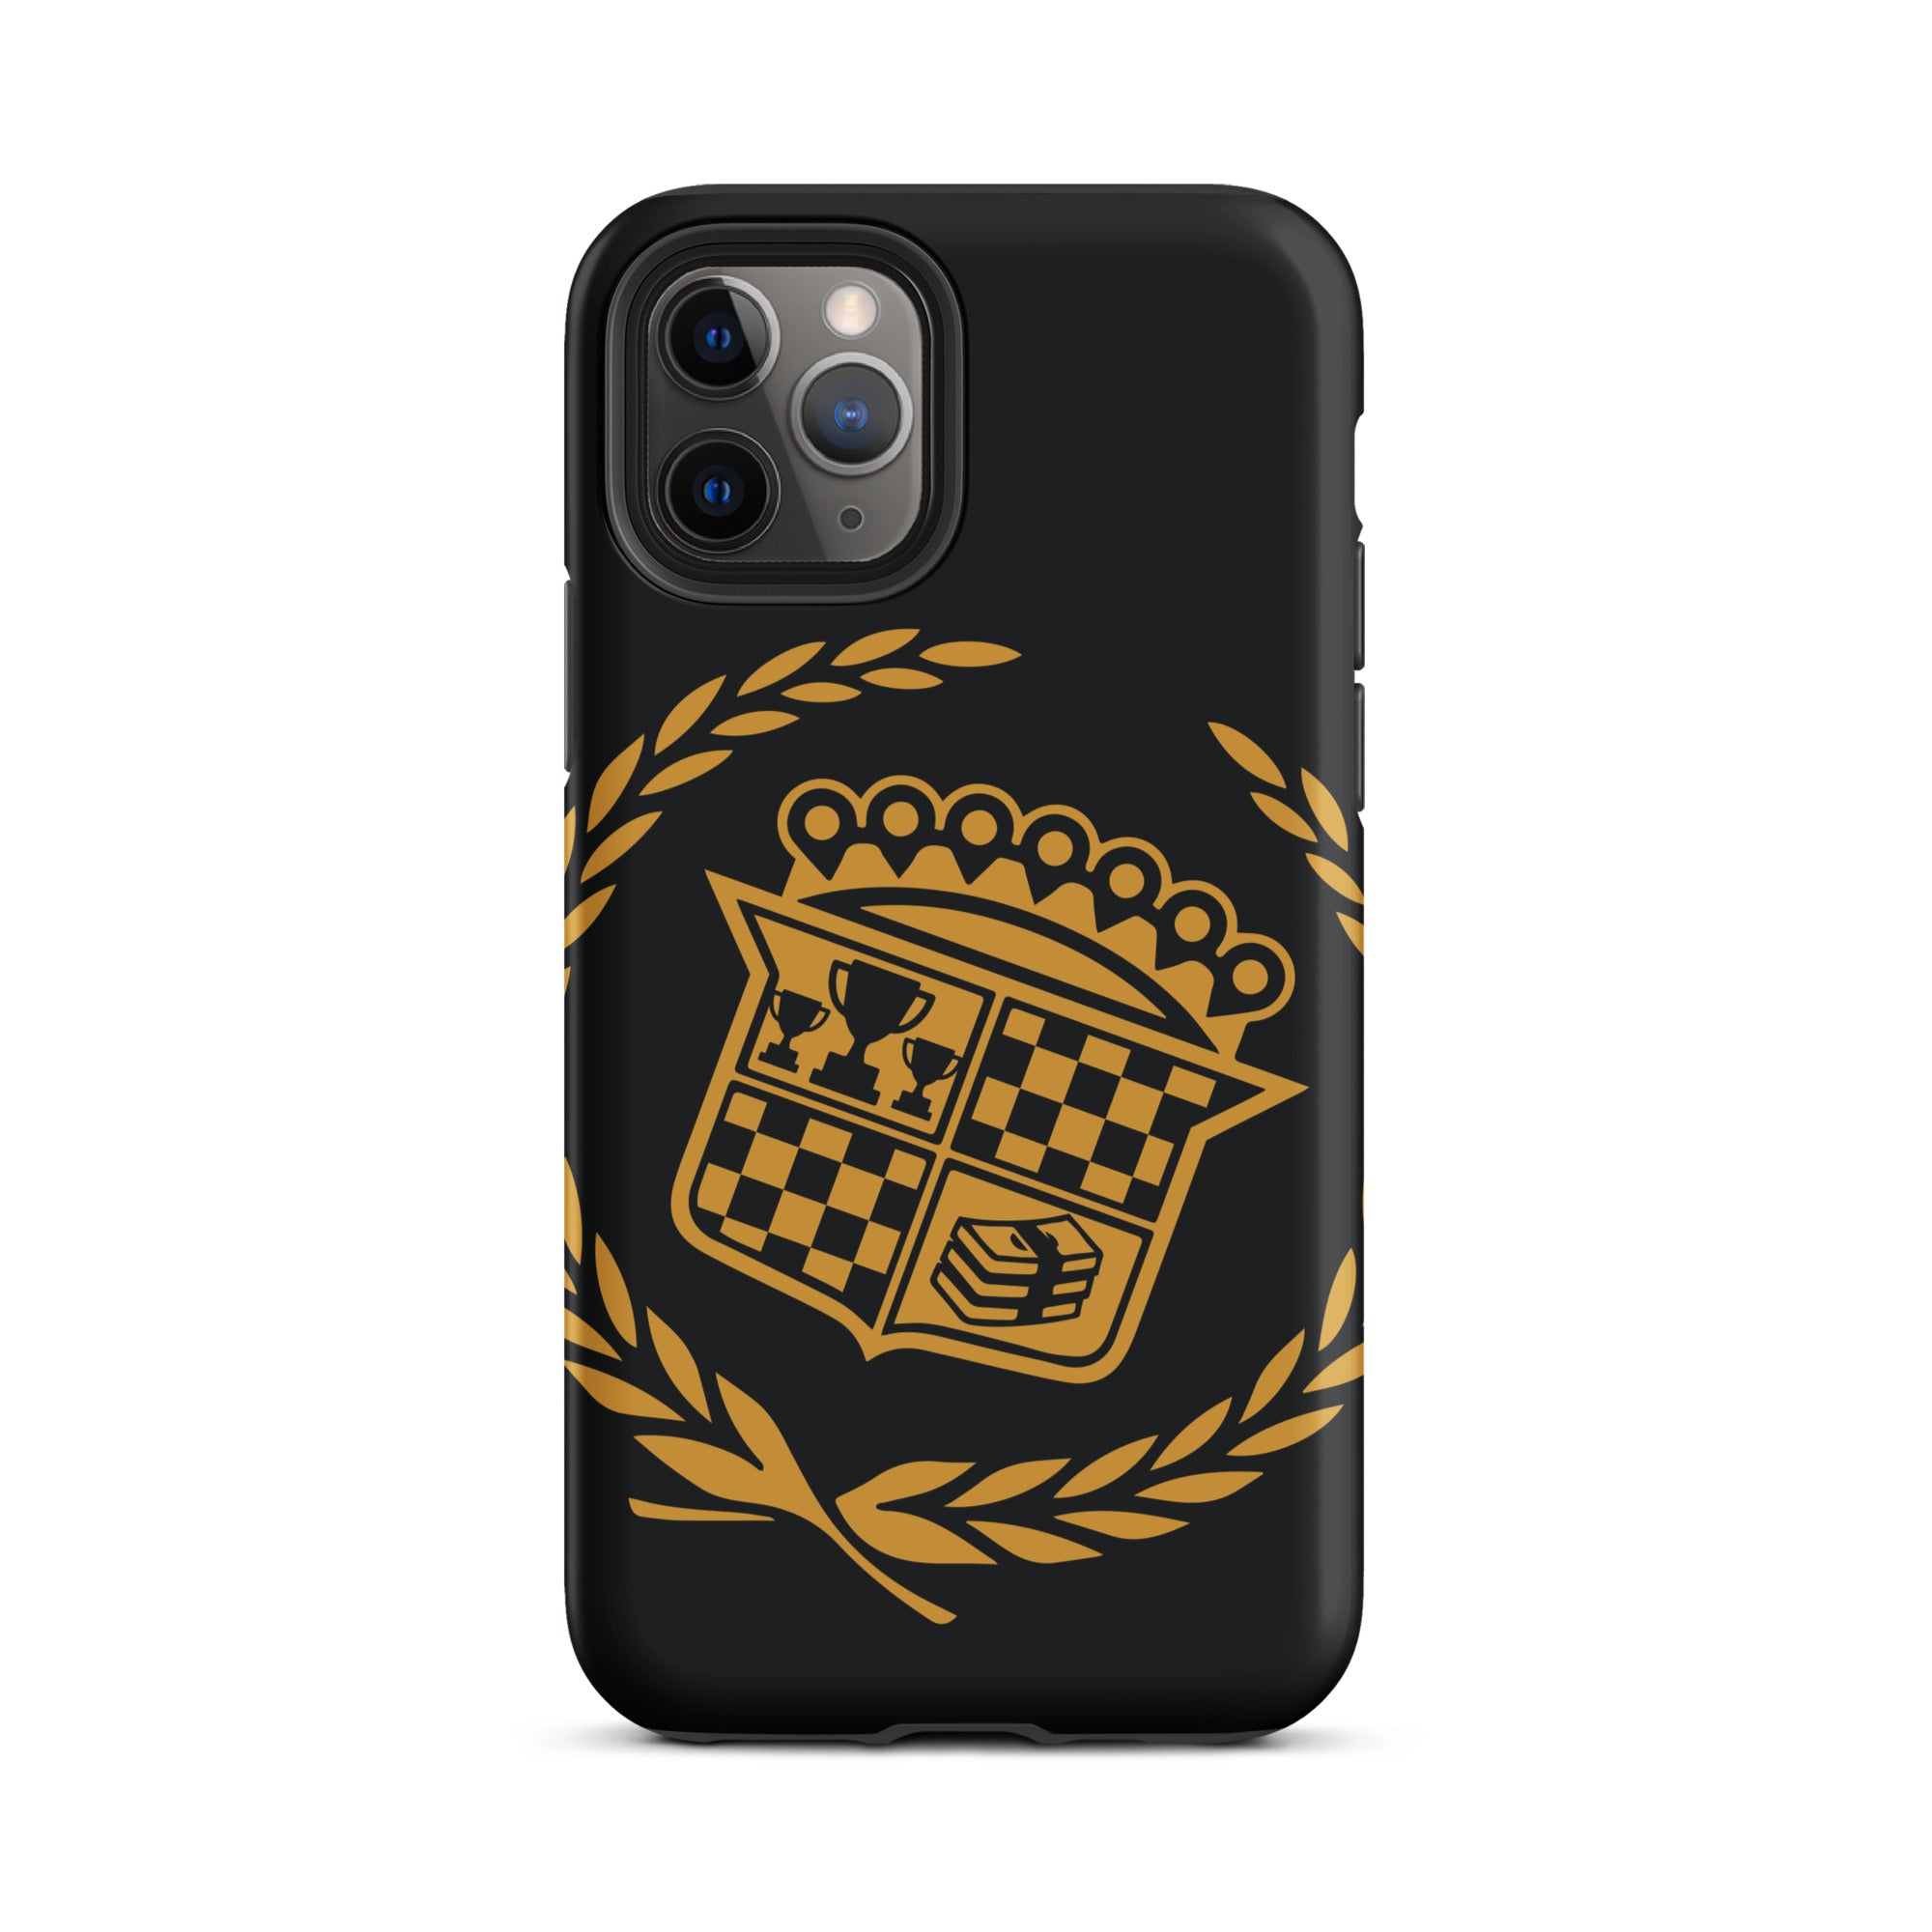 Crested iPhone Case